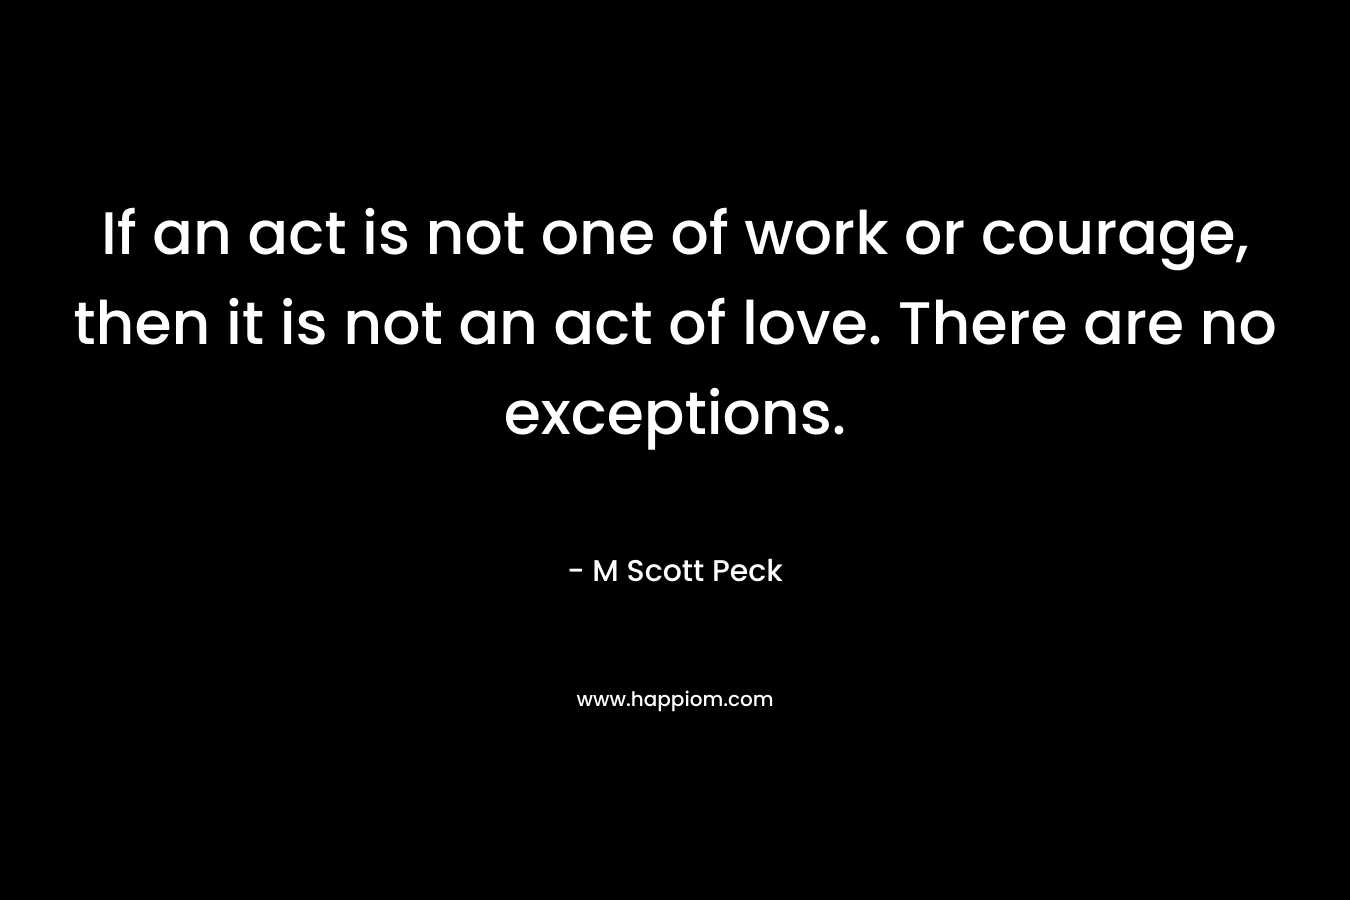 If an act is not one of work or courage, then it is not an act of love. There are no exceptions.